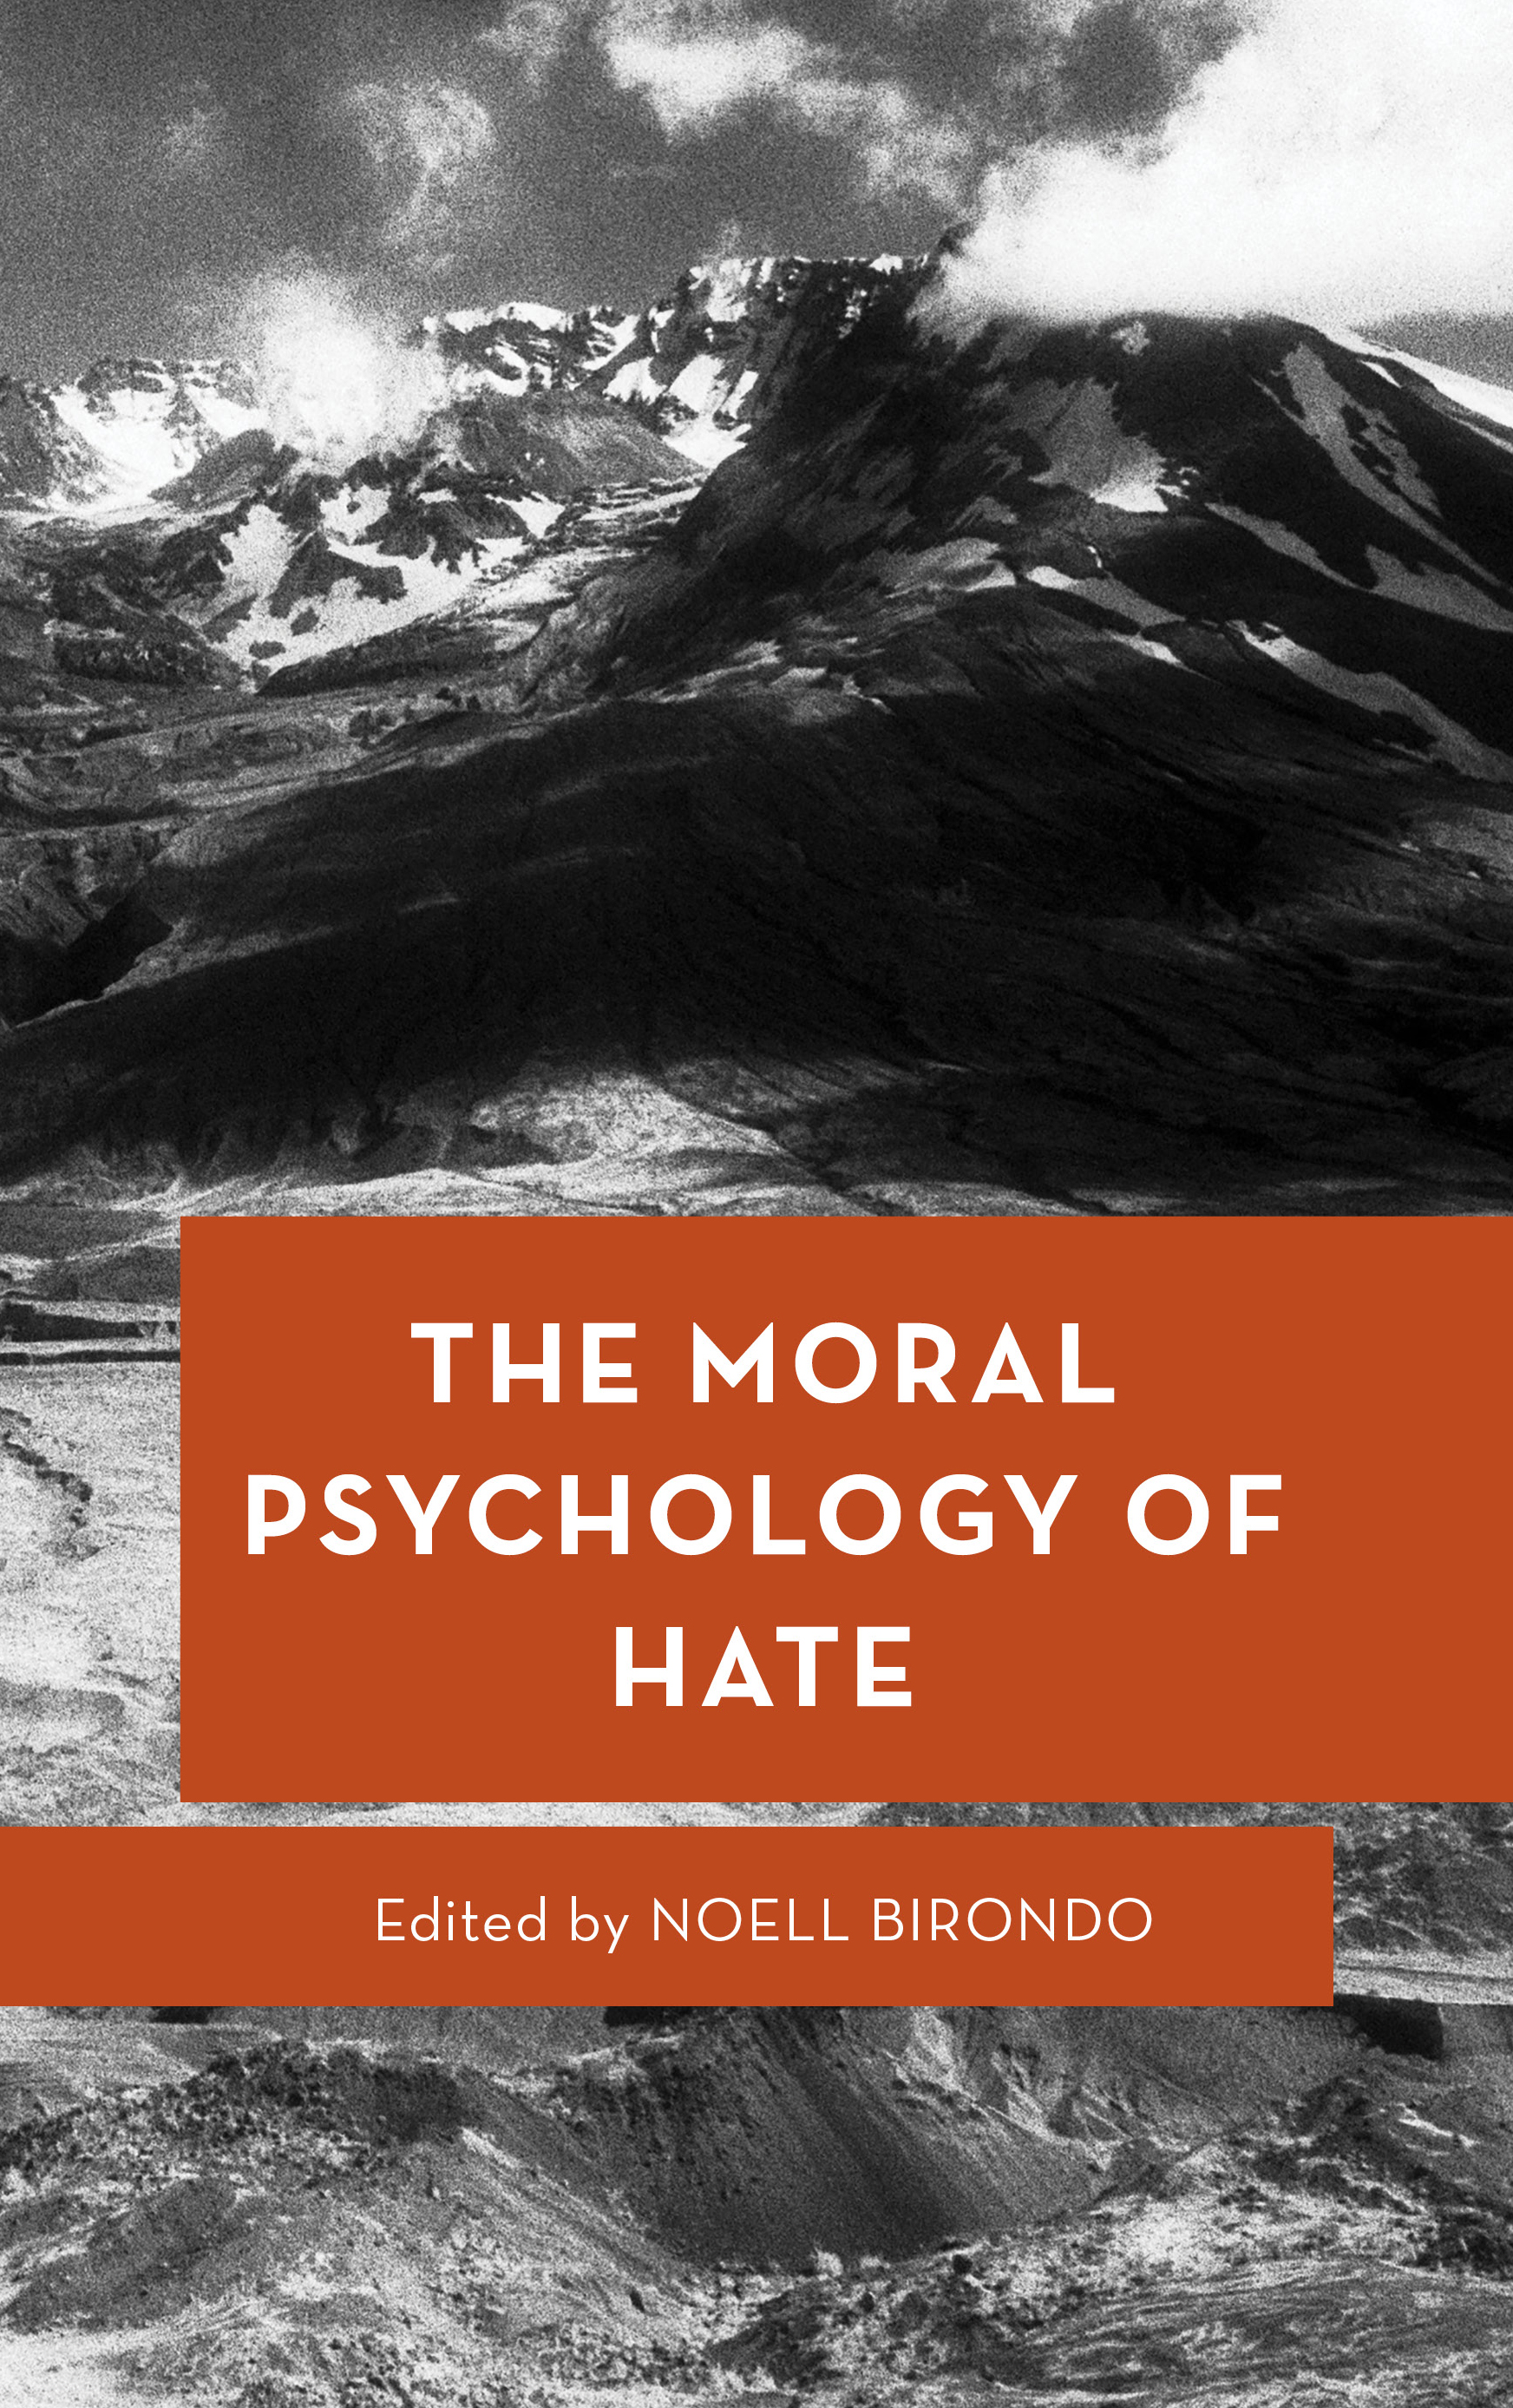 Cover image of The Moral Psychology of Hate, edited by Noell Birondo